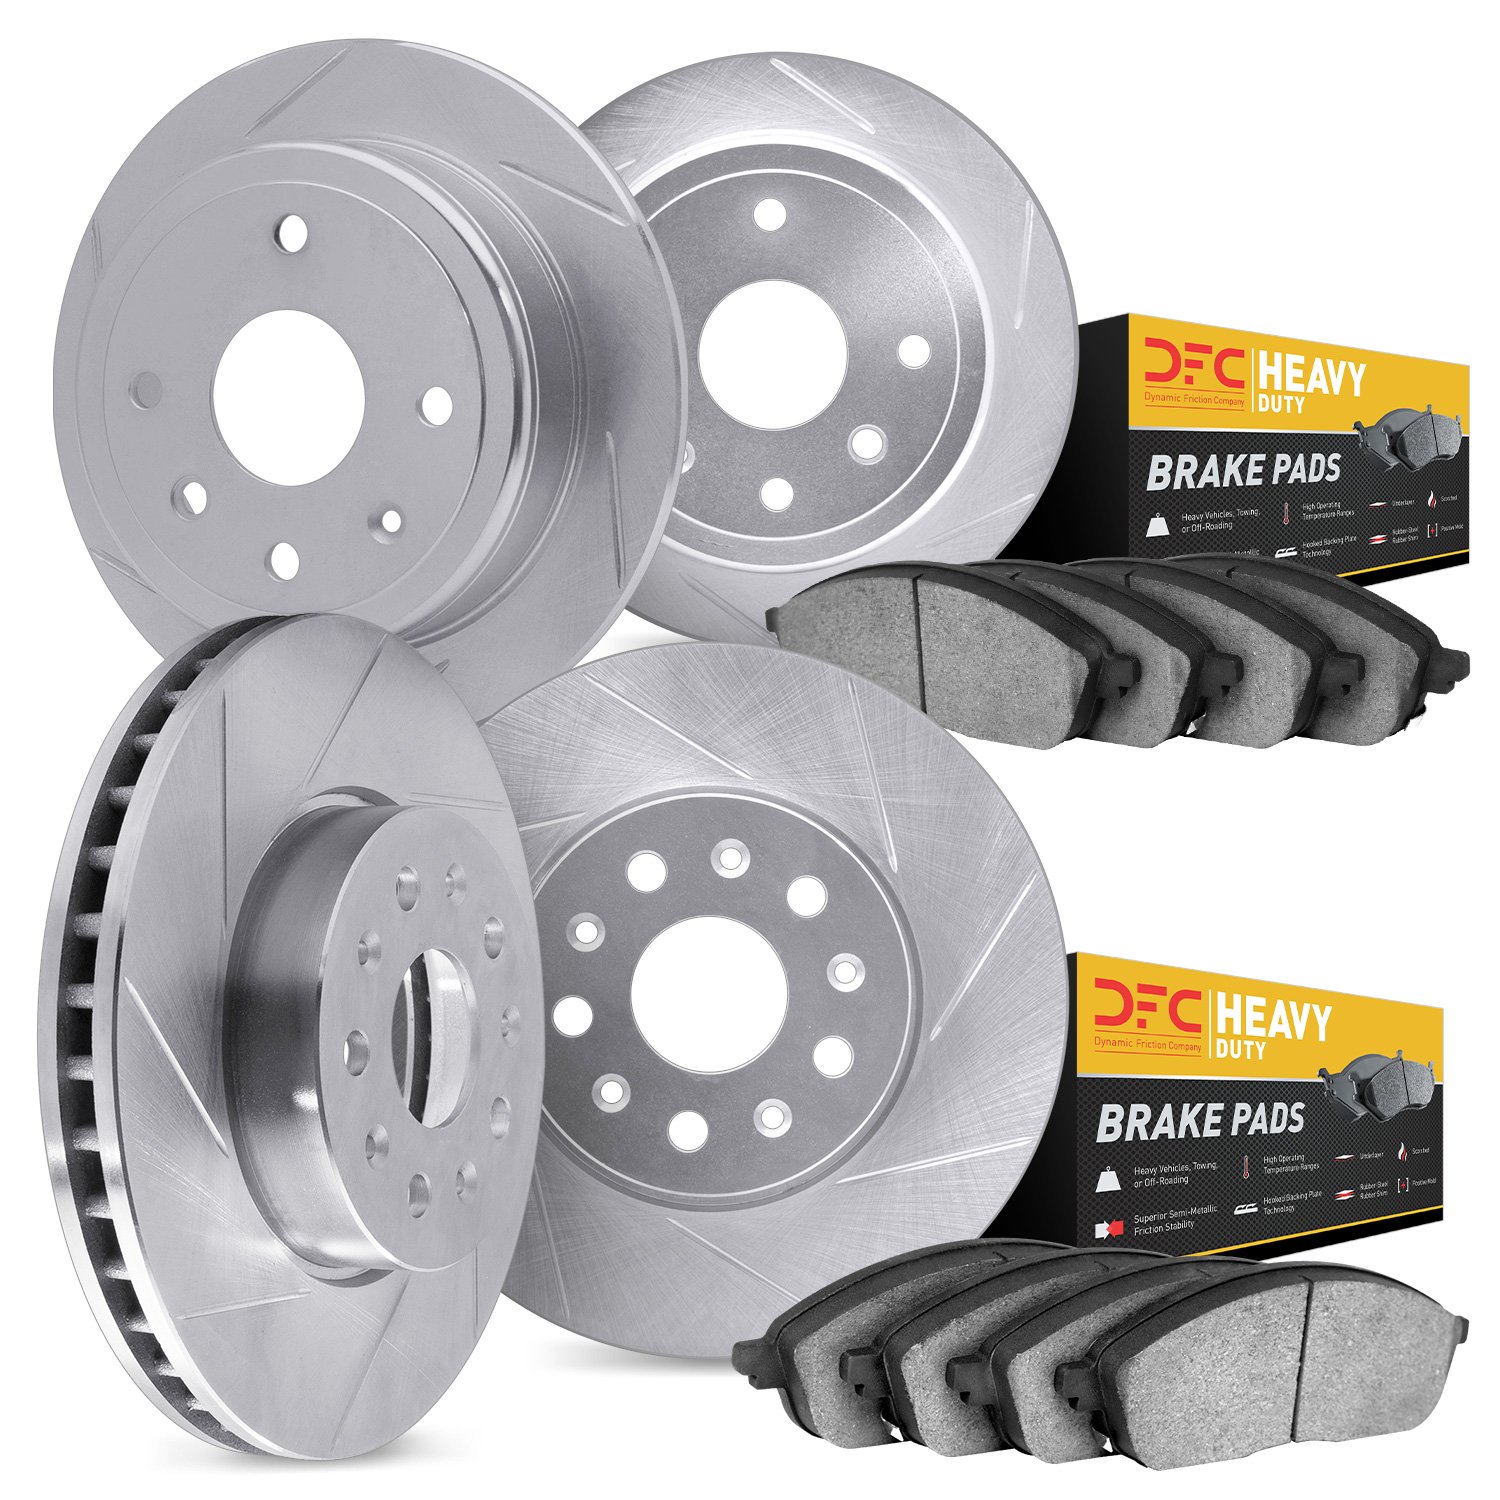 5204-42054 Slotted Brake Rotors w/Heavy-Duty Brake Pads Kits [Silver], 1993-1994 Mopar, Position: Front and Rear